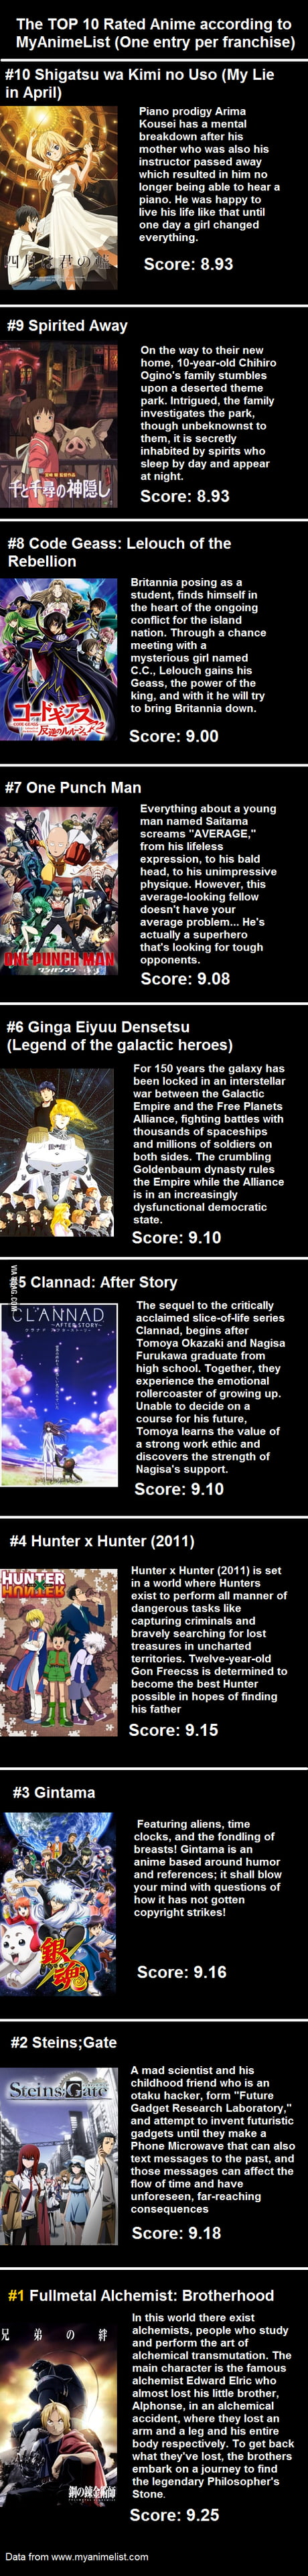 Top 10 anime list with small description and rating - 9GAG